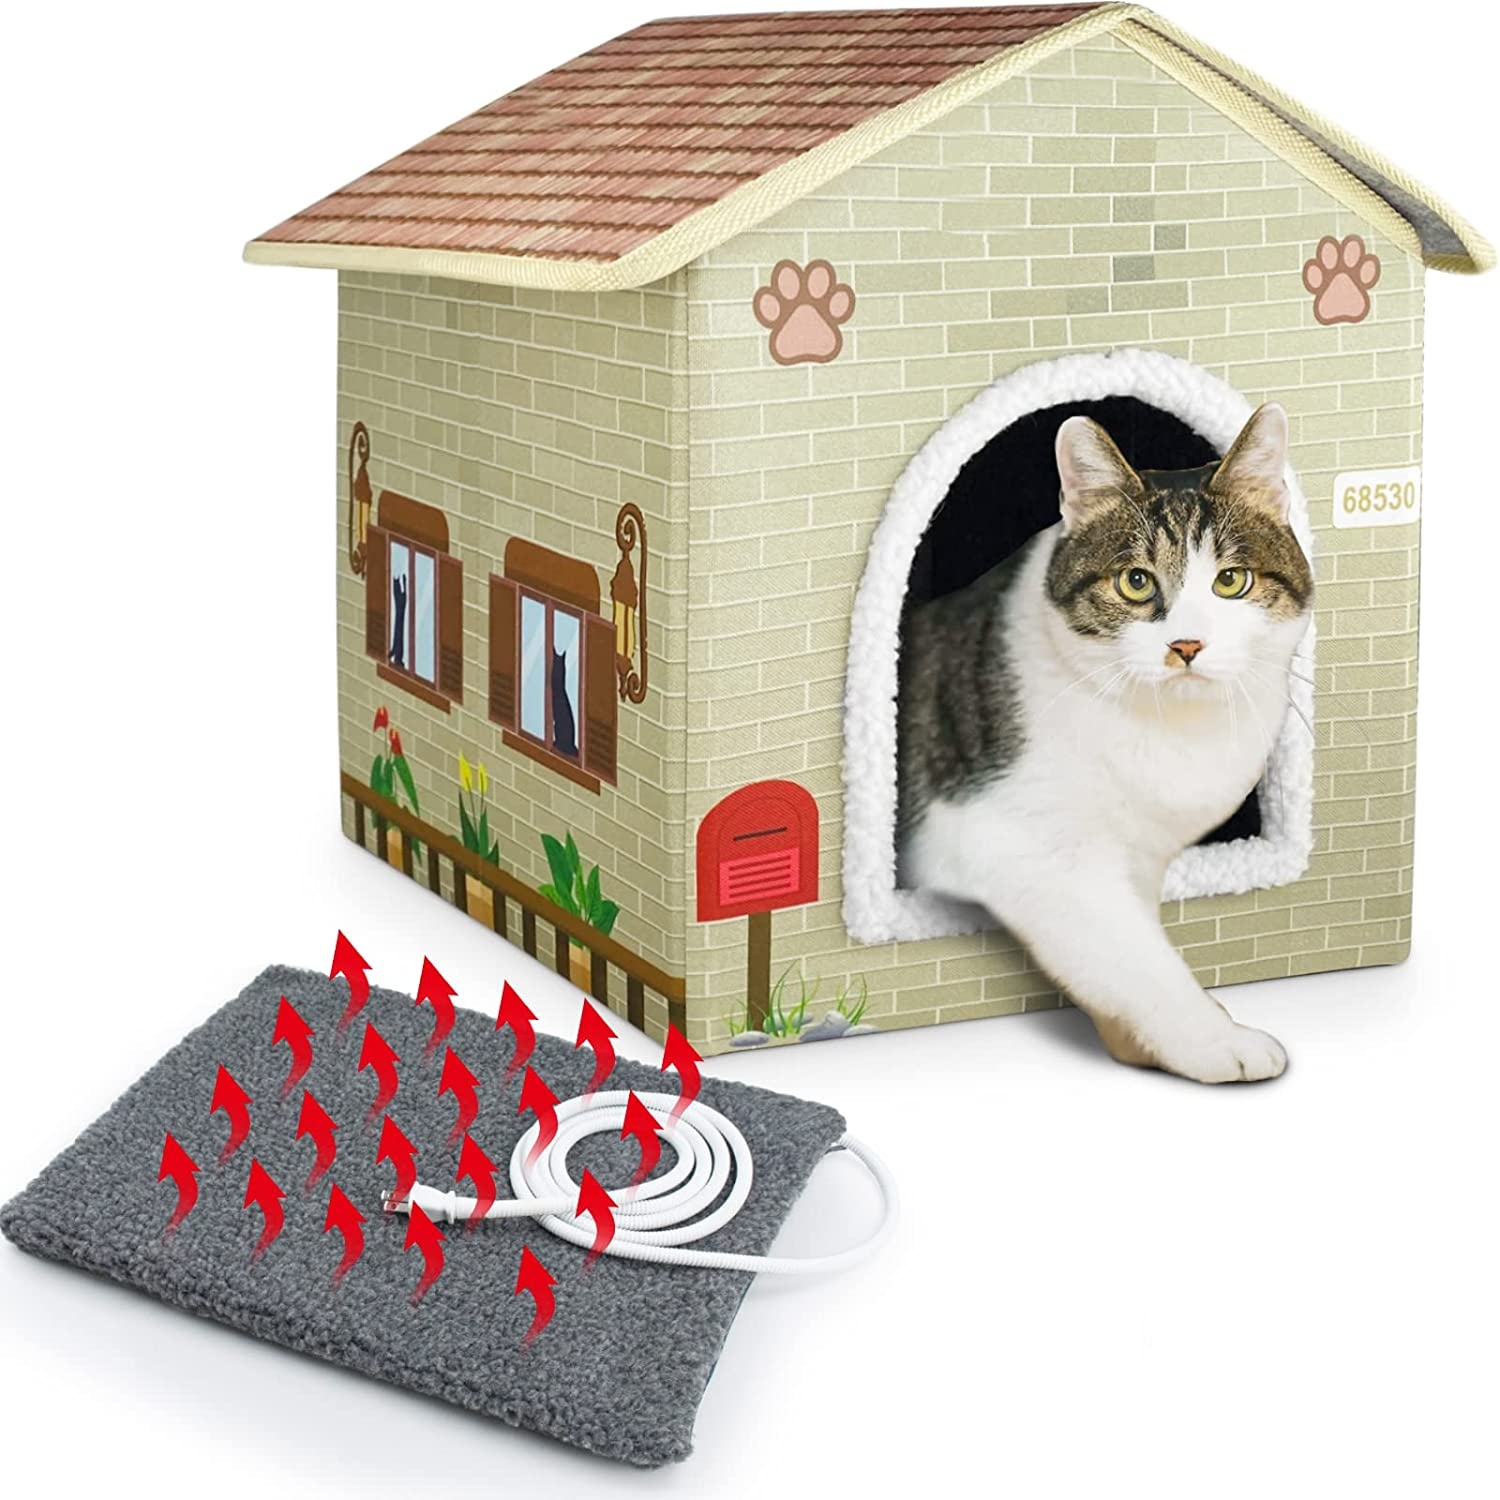 Heated Cat House Waterproof for Outdoor Cats